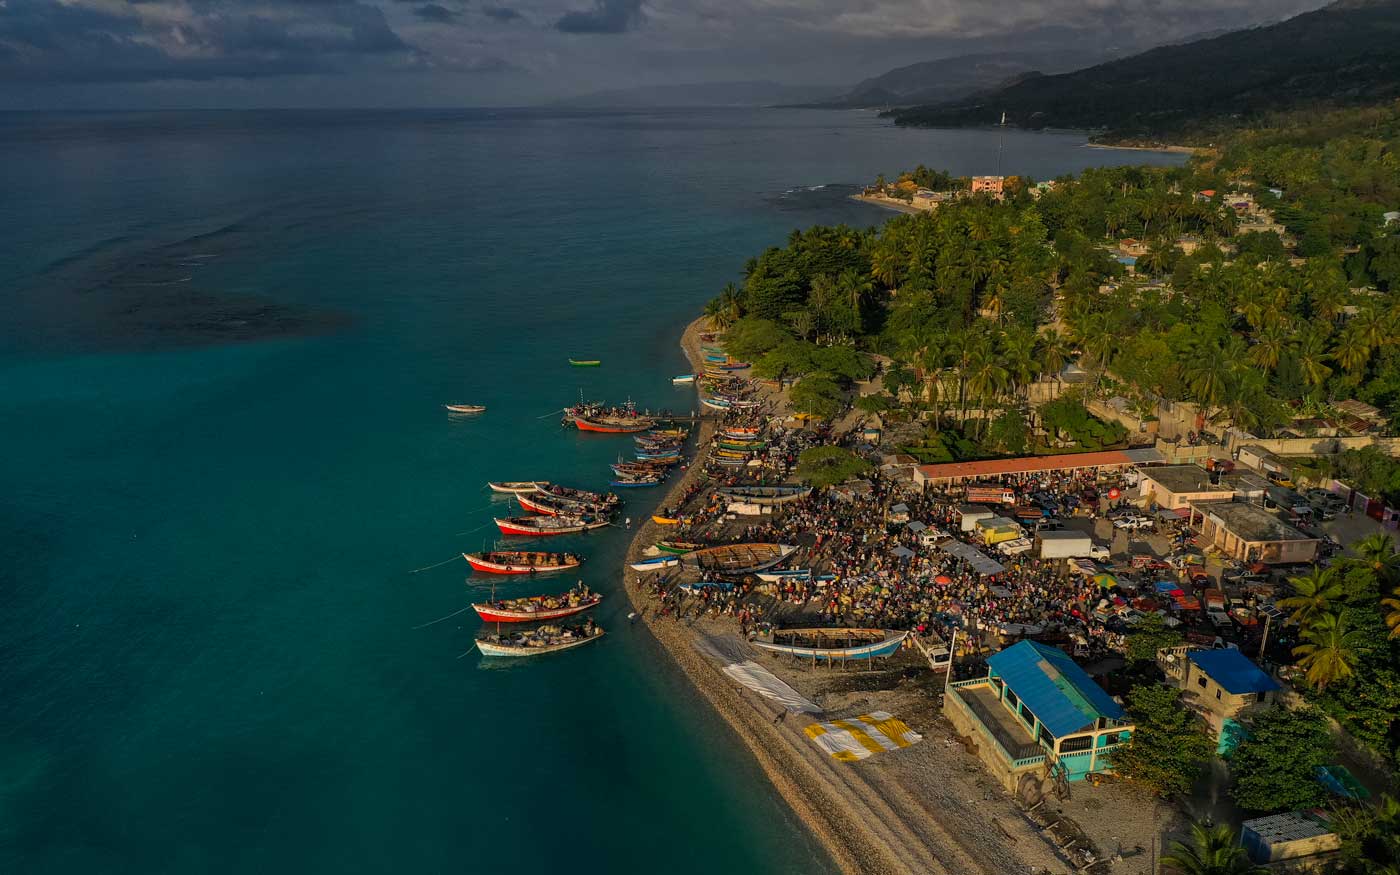 aerial view of coastal village with market area and boats